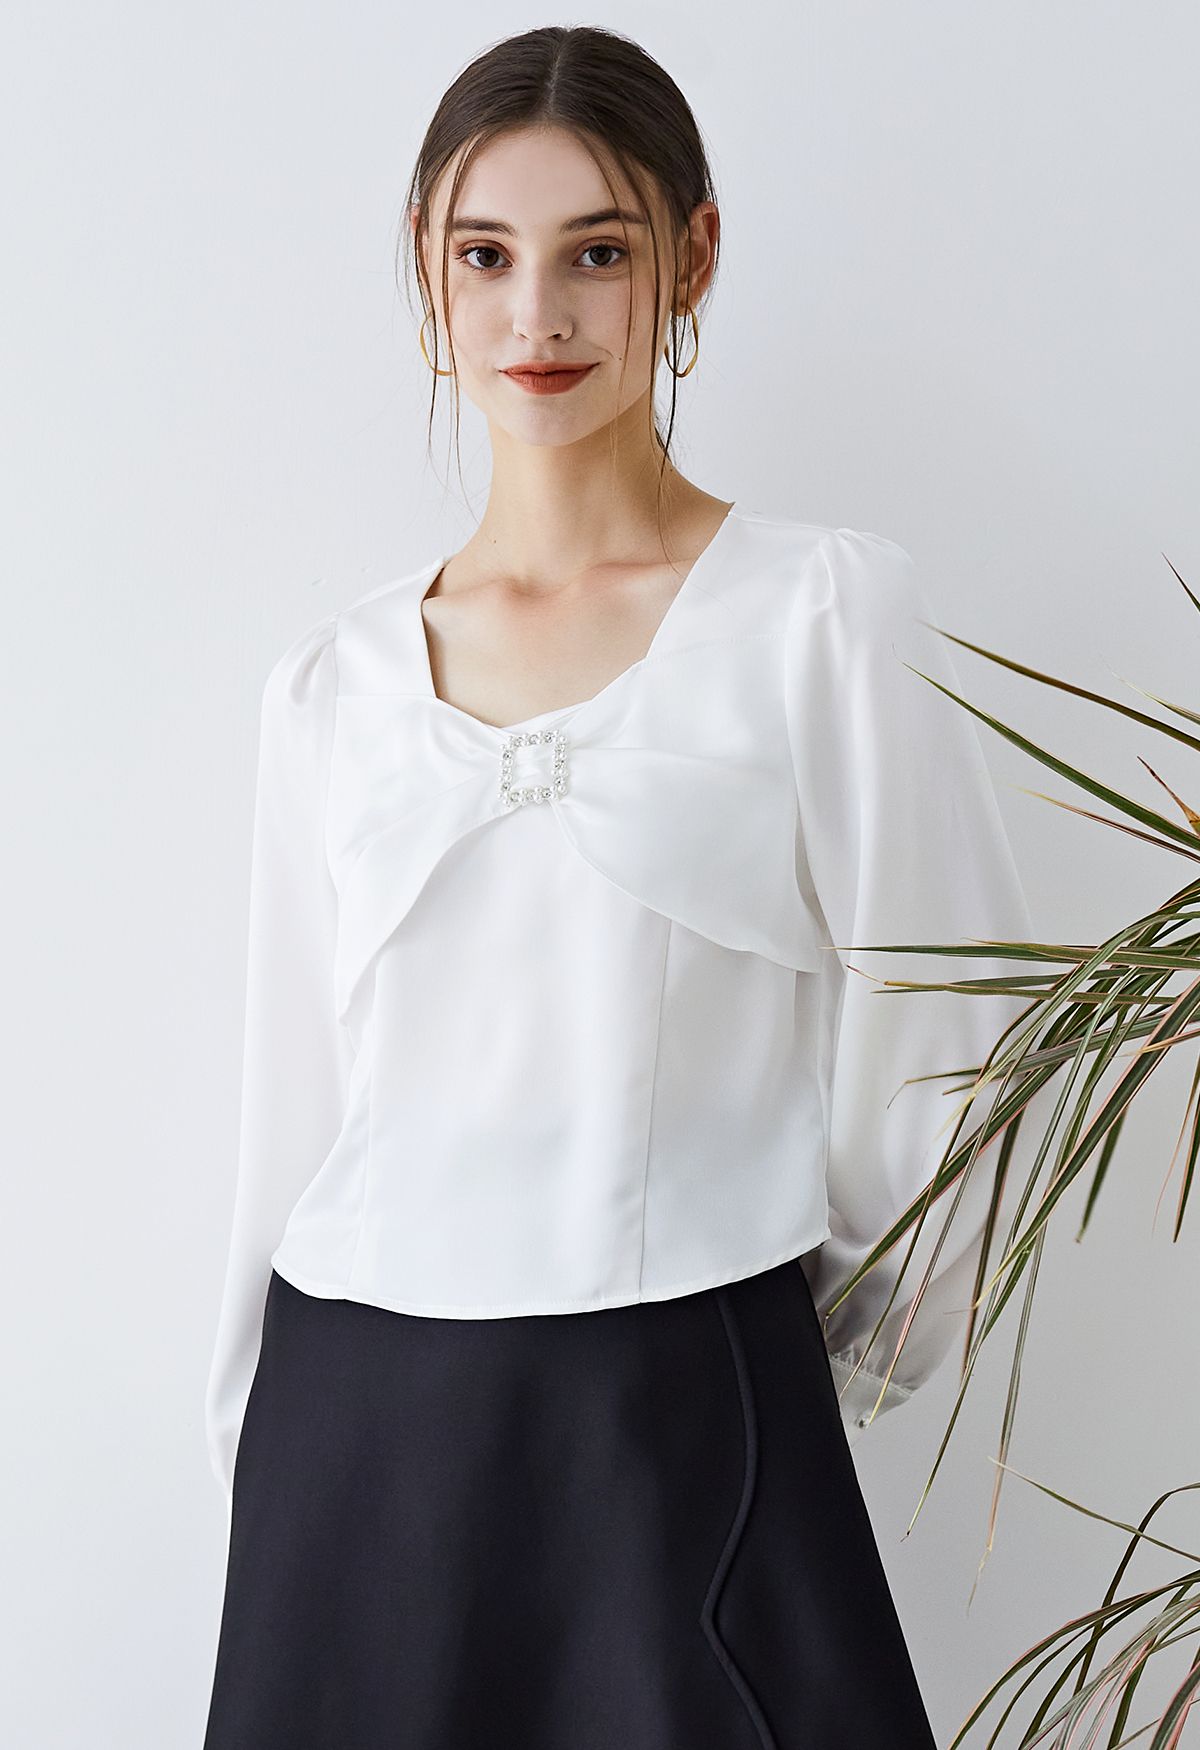 Sweetheart Neck Diamante Bowknot Satin Top in Weiß